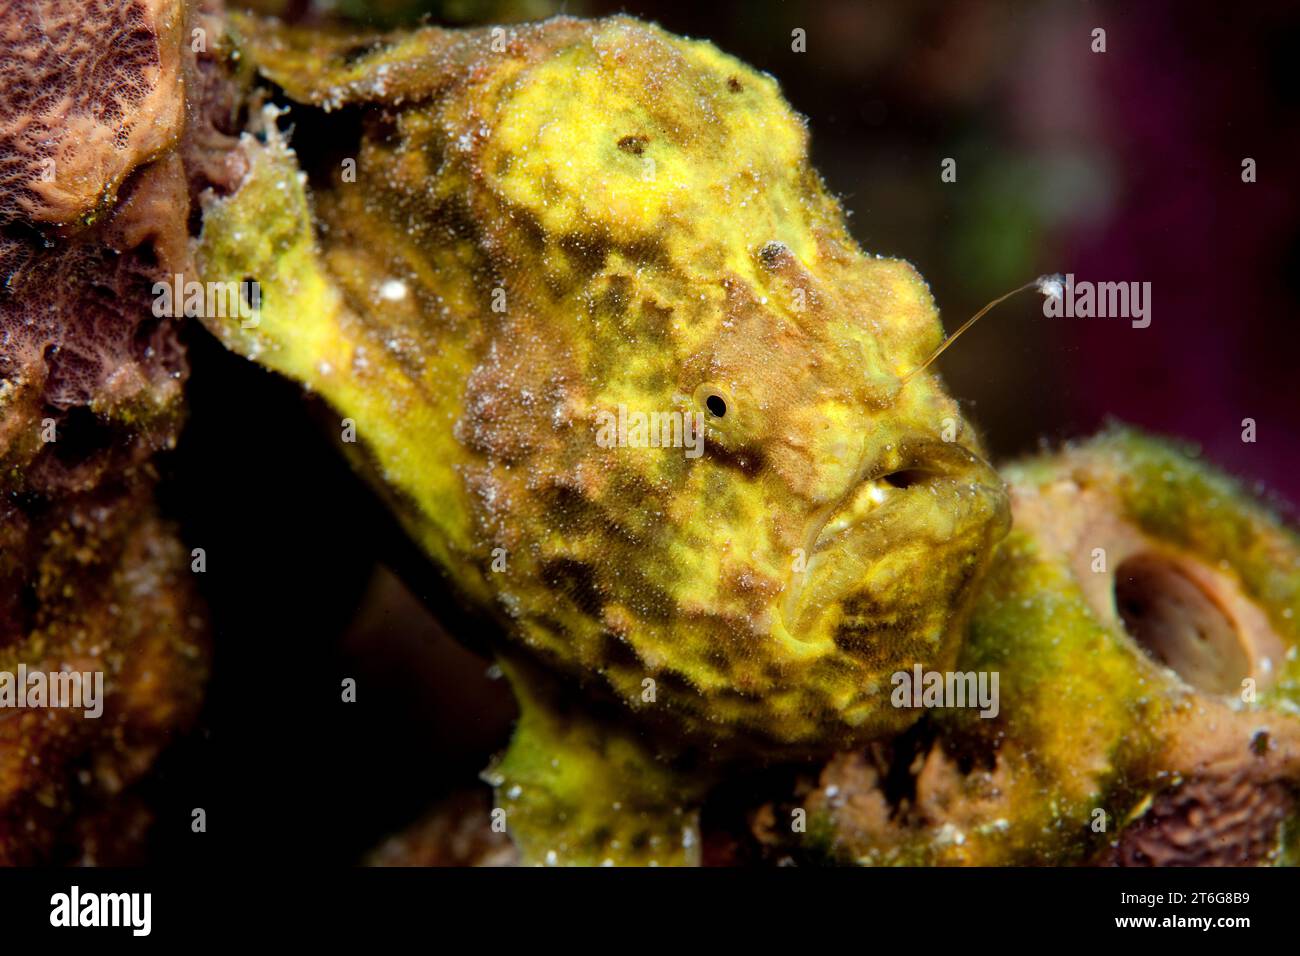 Fishing lure of the Longlure frogfish (Antennarius multiocellatus can be seen in this underwater close-up. Stock Photo